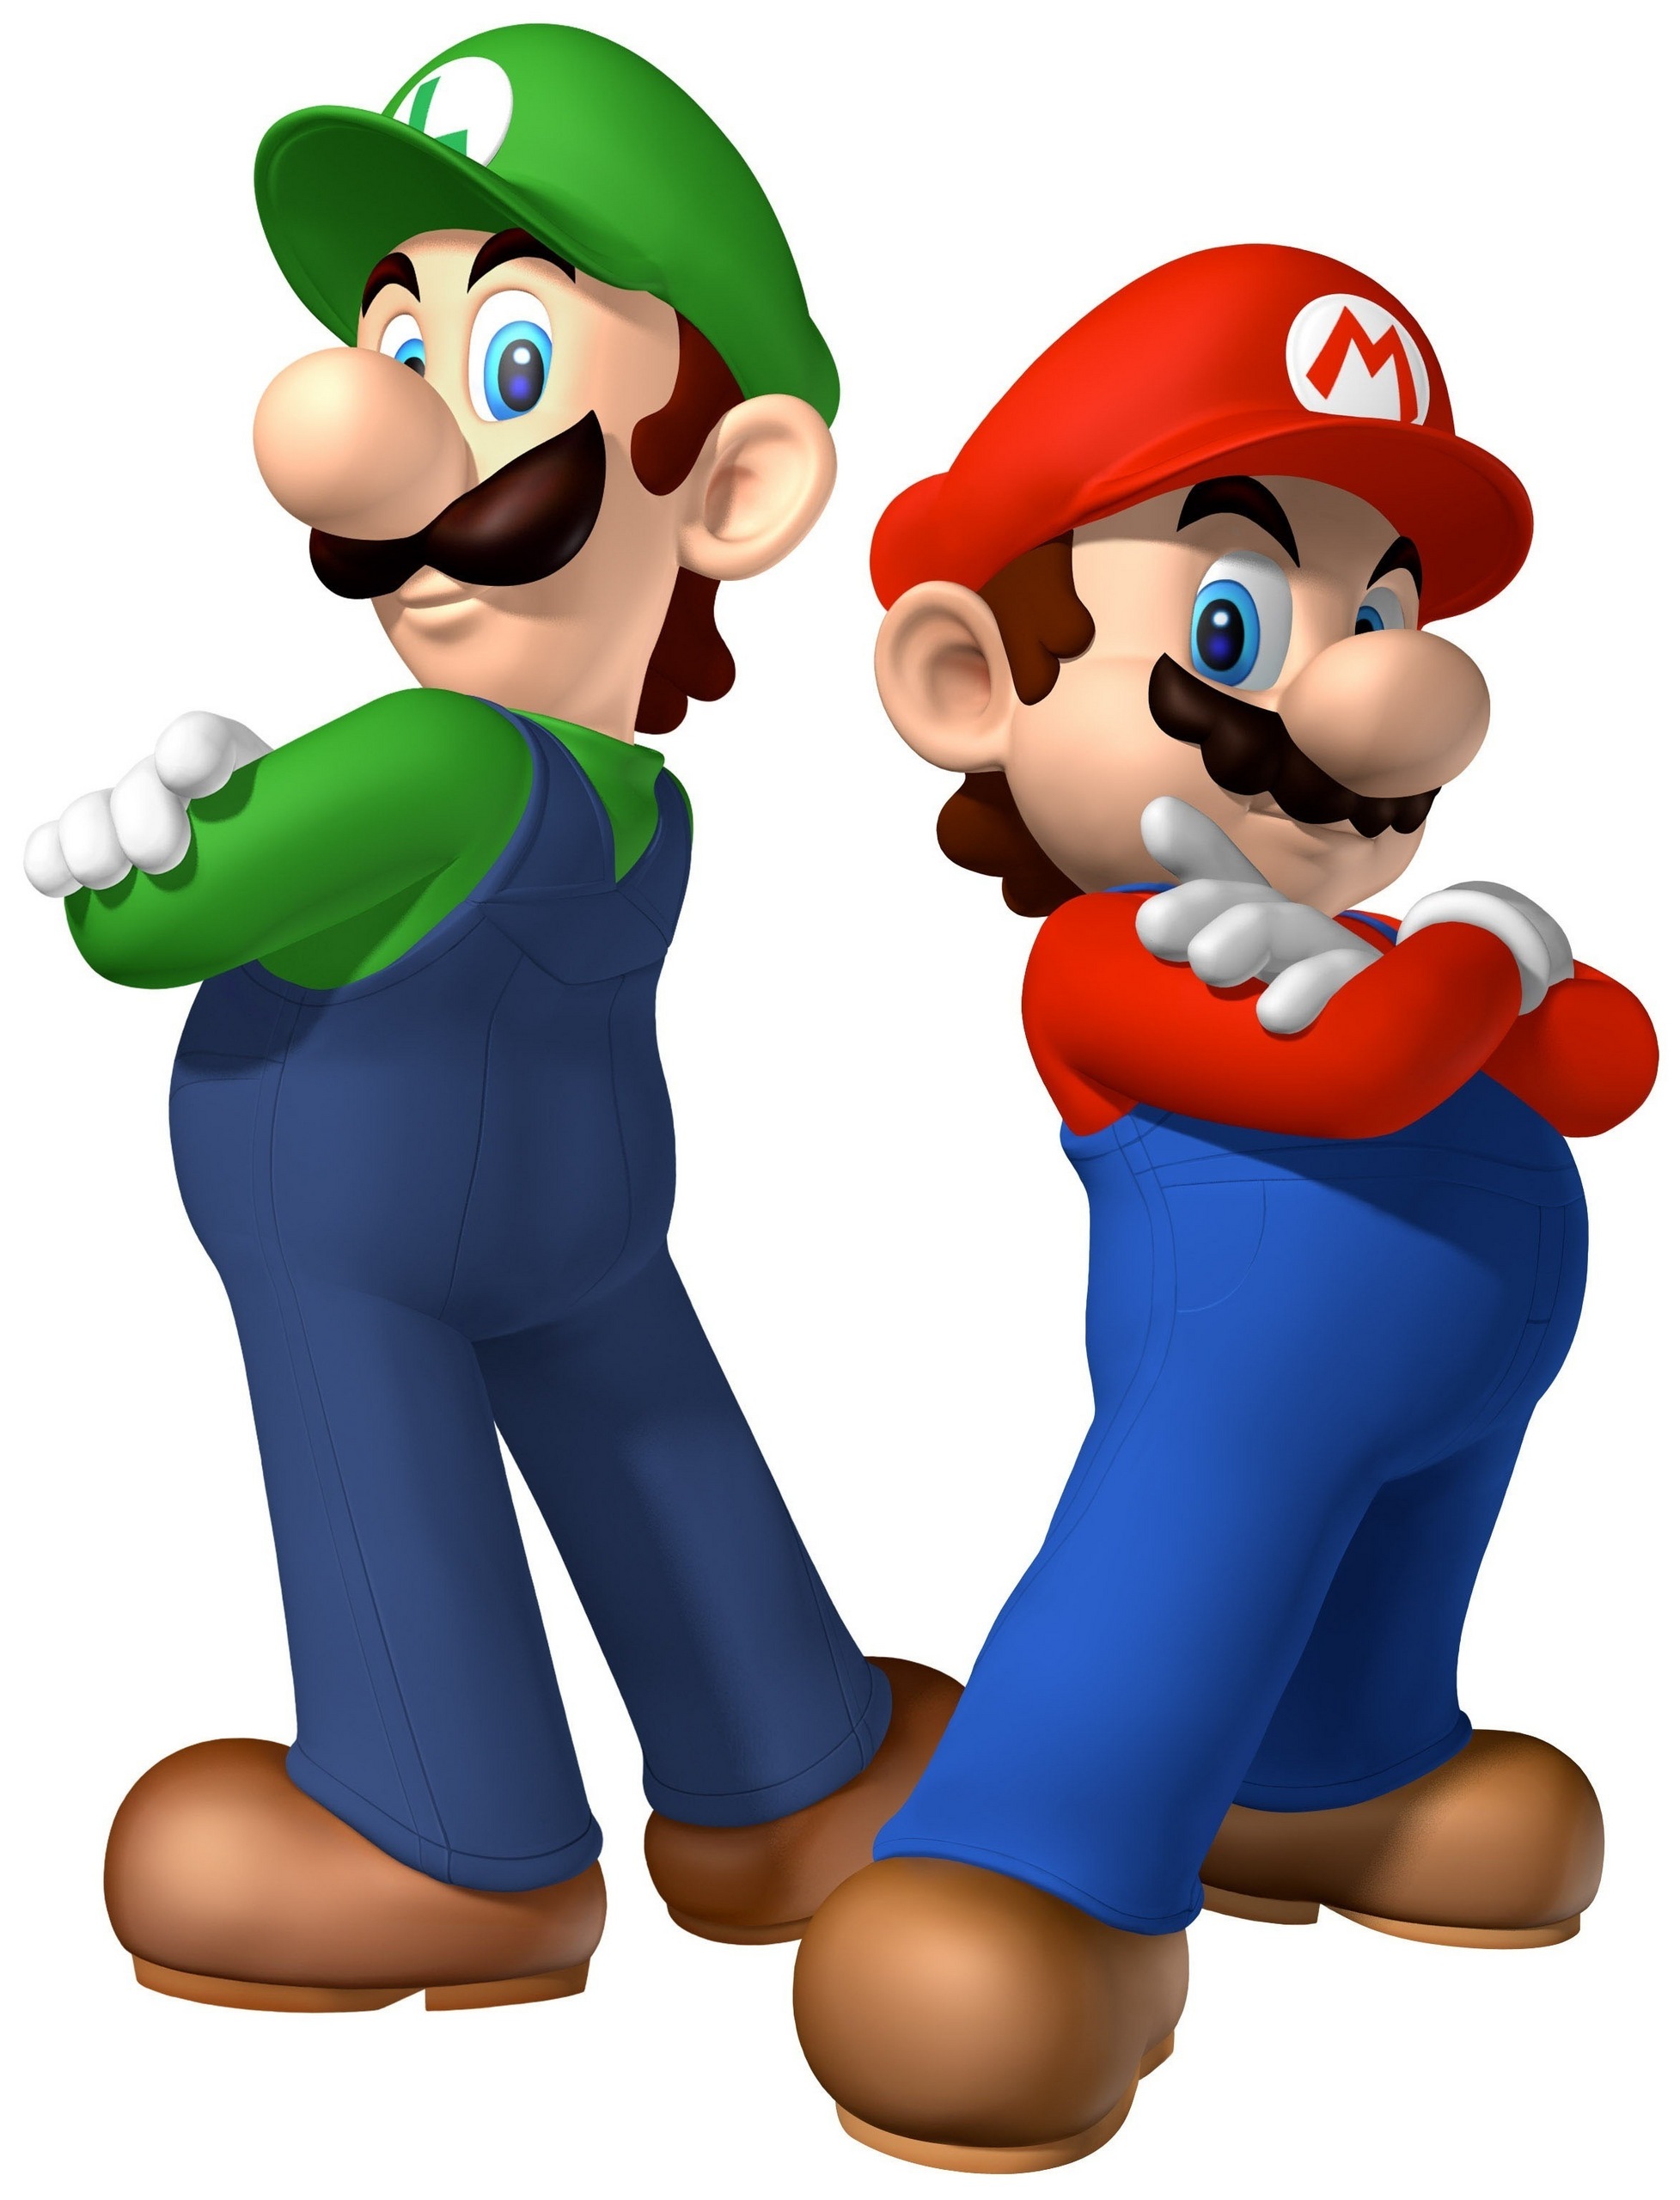 Mario and Luigi images The Mario Bros. HD wallpaper and background ...